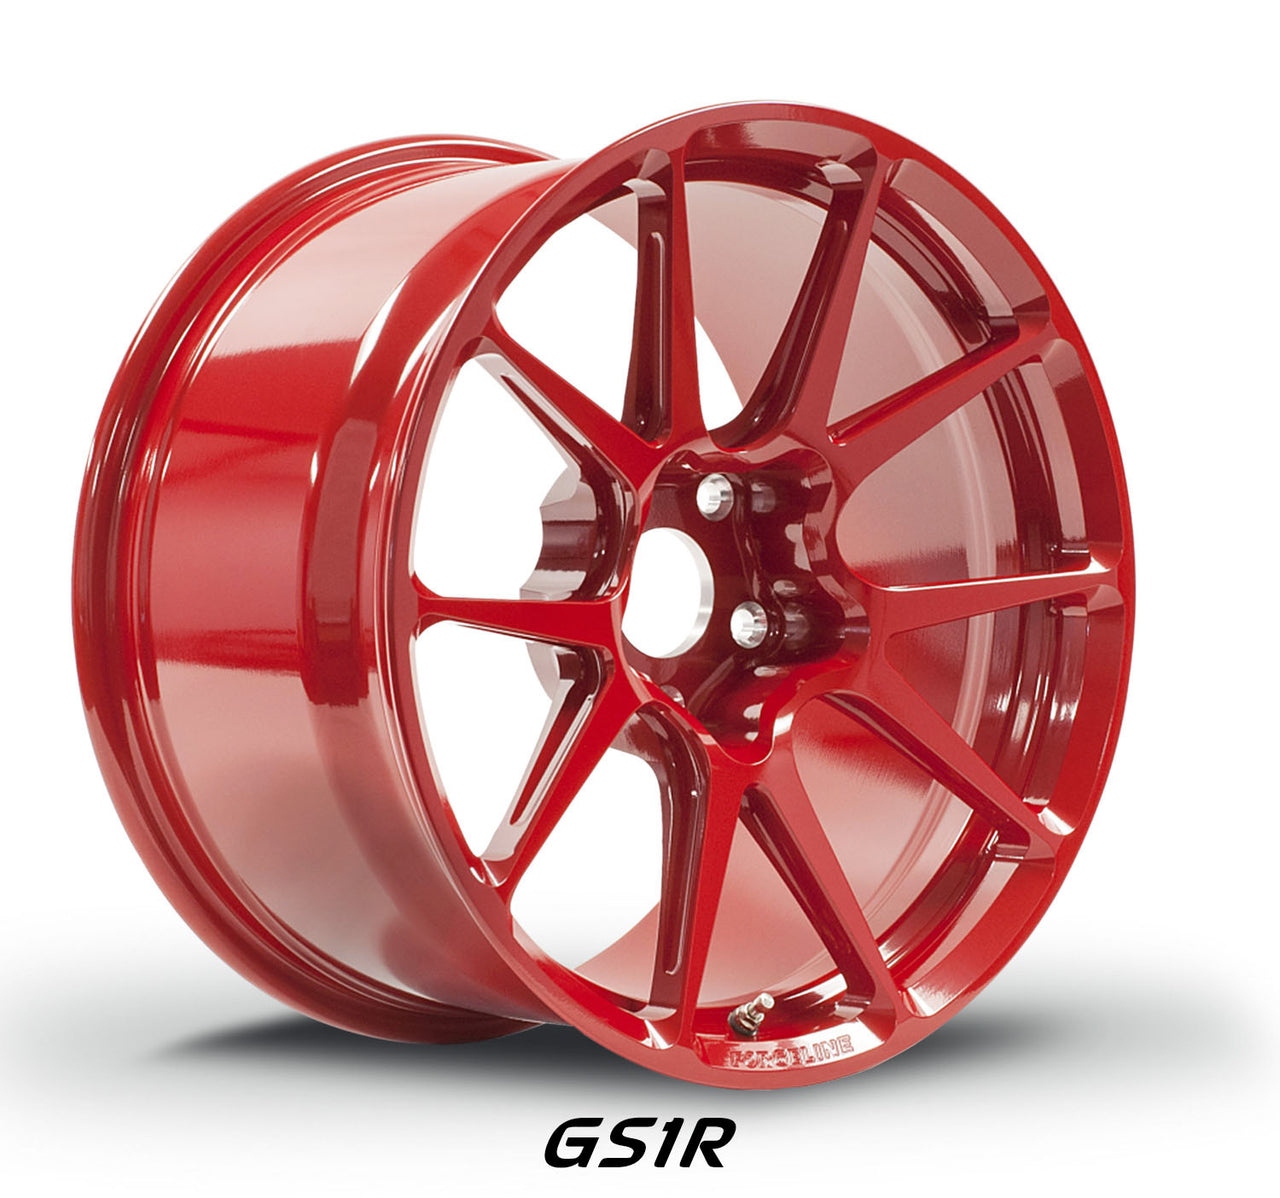 Forgeline Wheels GS1R in Gloss Red finish makes the Gen 6 Camaro ZL1 faster and lighter.